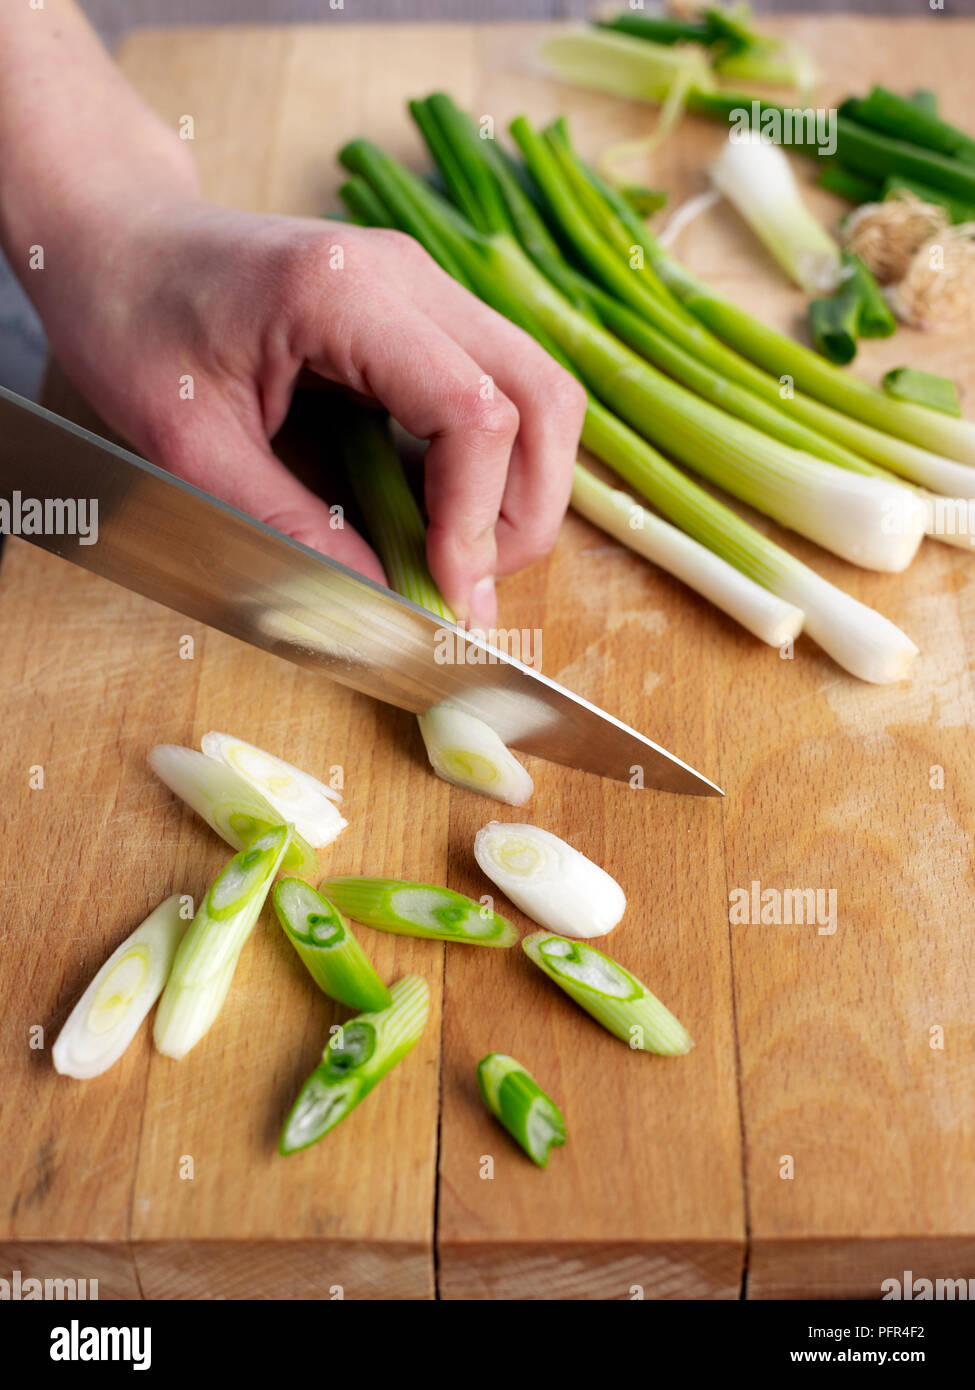 Chopping spring onions Stock Photo